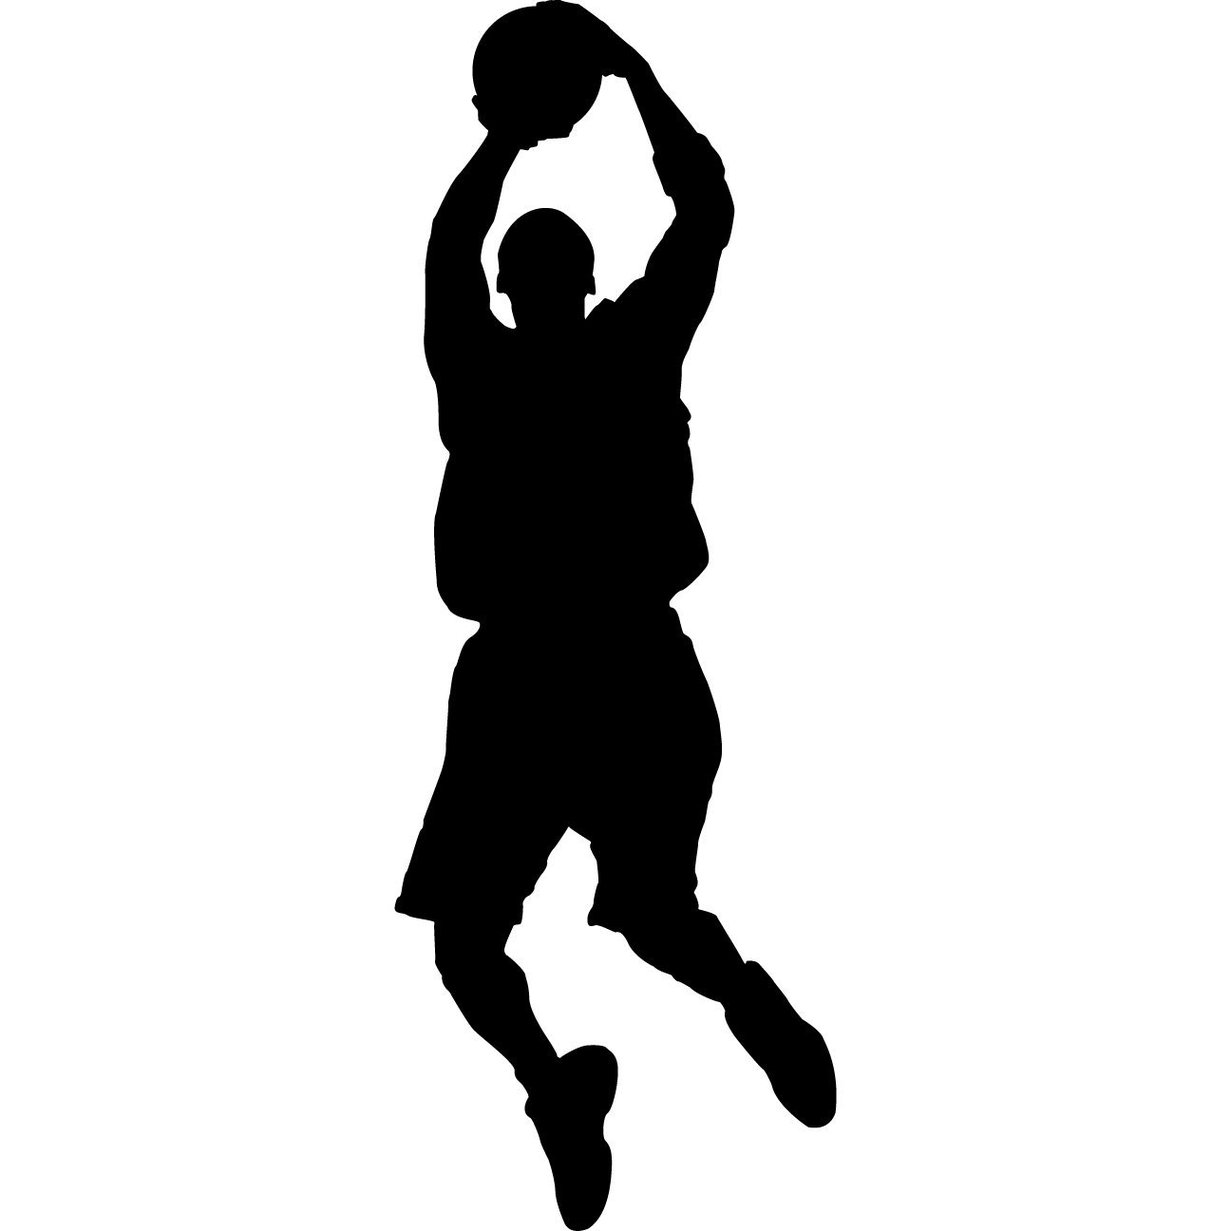 Free Silhouette Basketball Cliparts, Download Free Clip Art